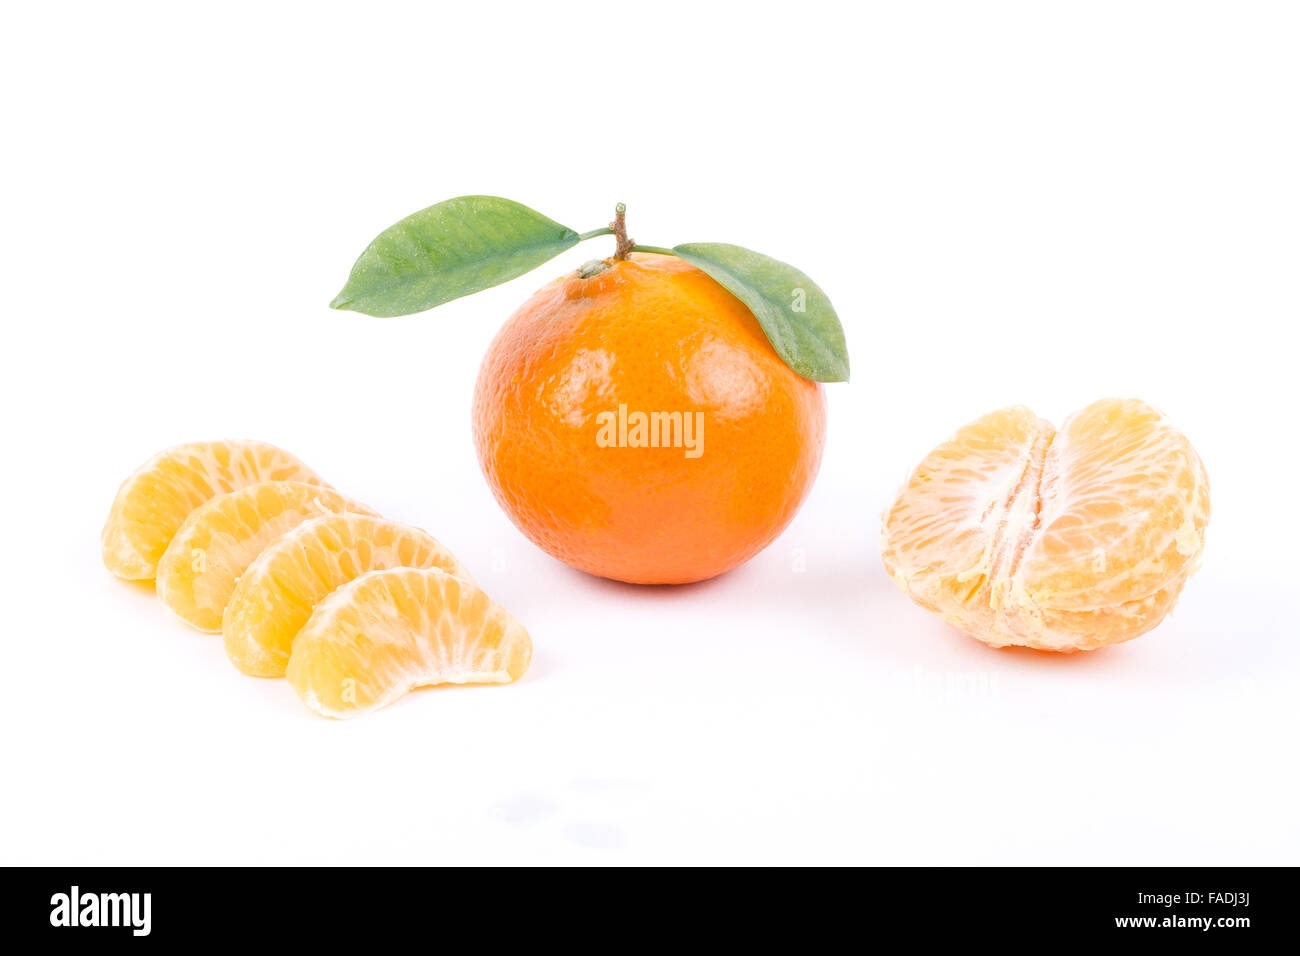 Tangerine with leaves and slices on white background Stock Photo